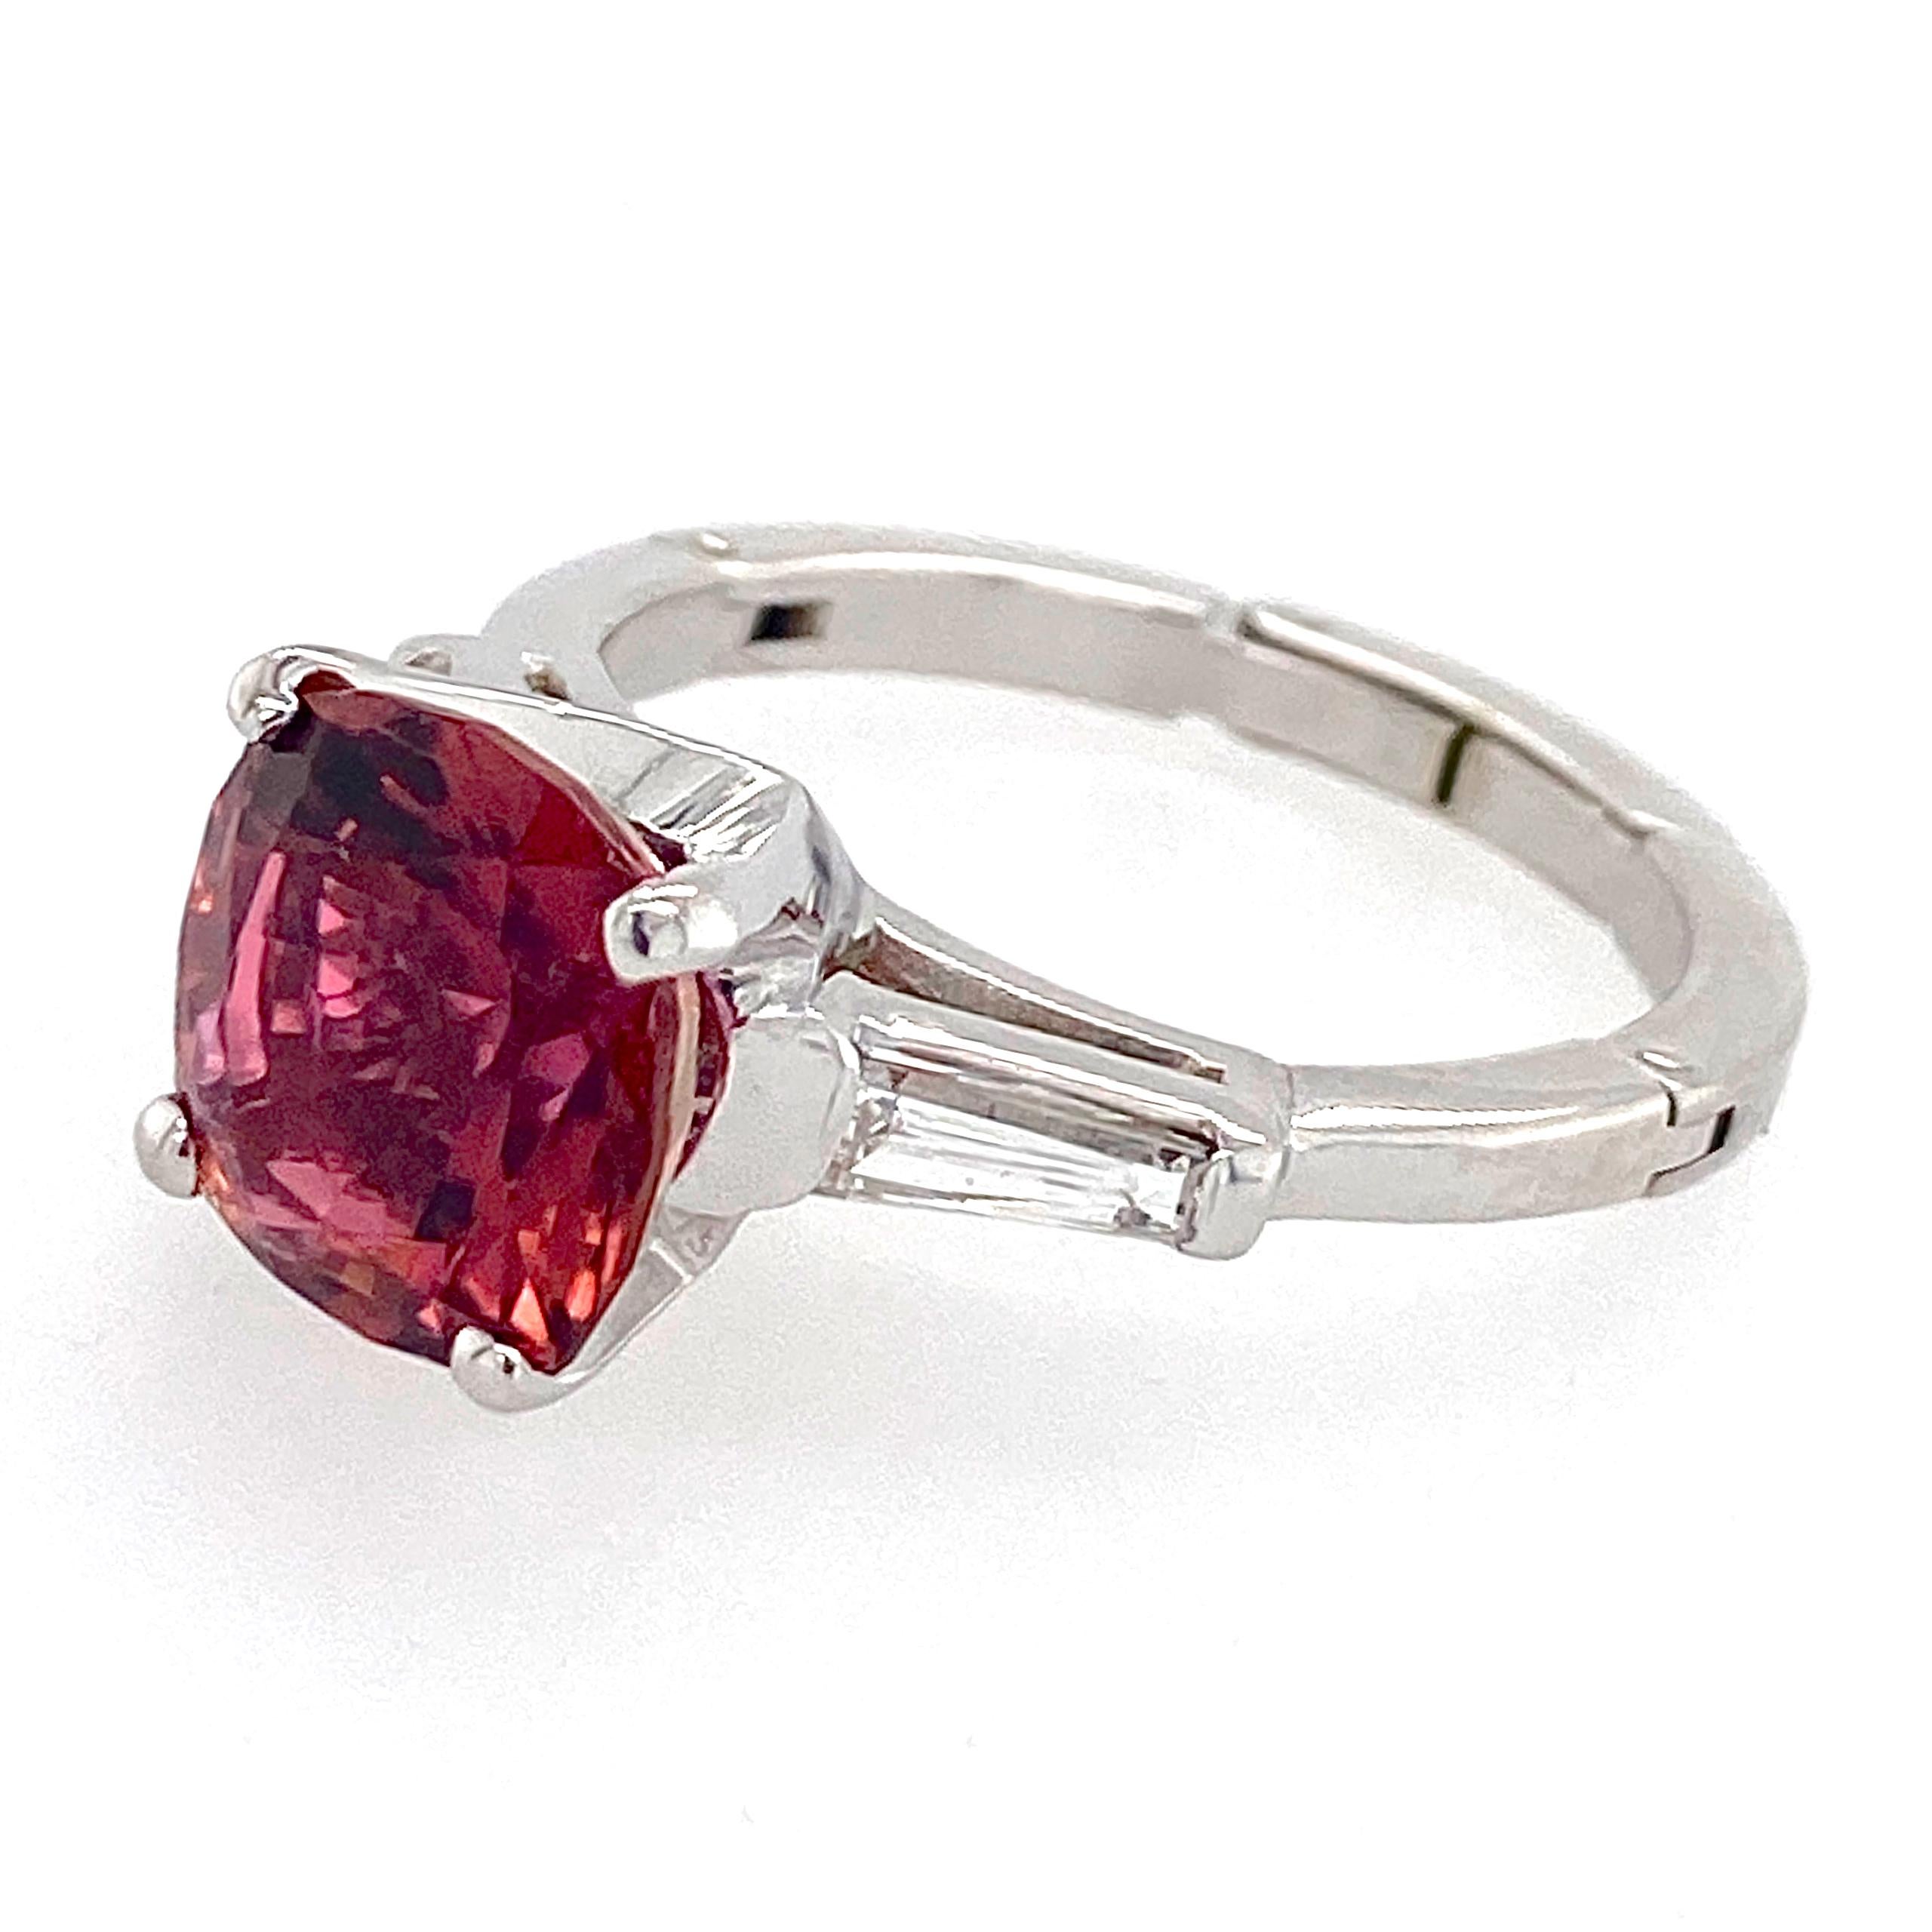 A beautiful, richly hued dark pink tourmaline, ethically sourced and lovingly cut by master Tennessee gemcutter Dan Lynch, looks completely at home in a timeless three-stone setting.

The ring is a classic platinum Deco-era cathedral setting with